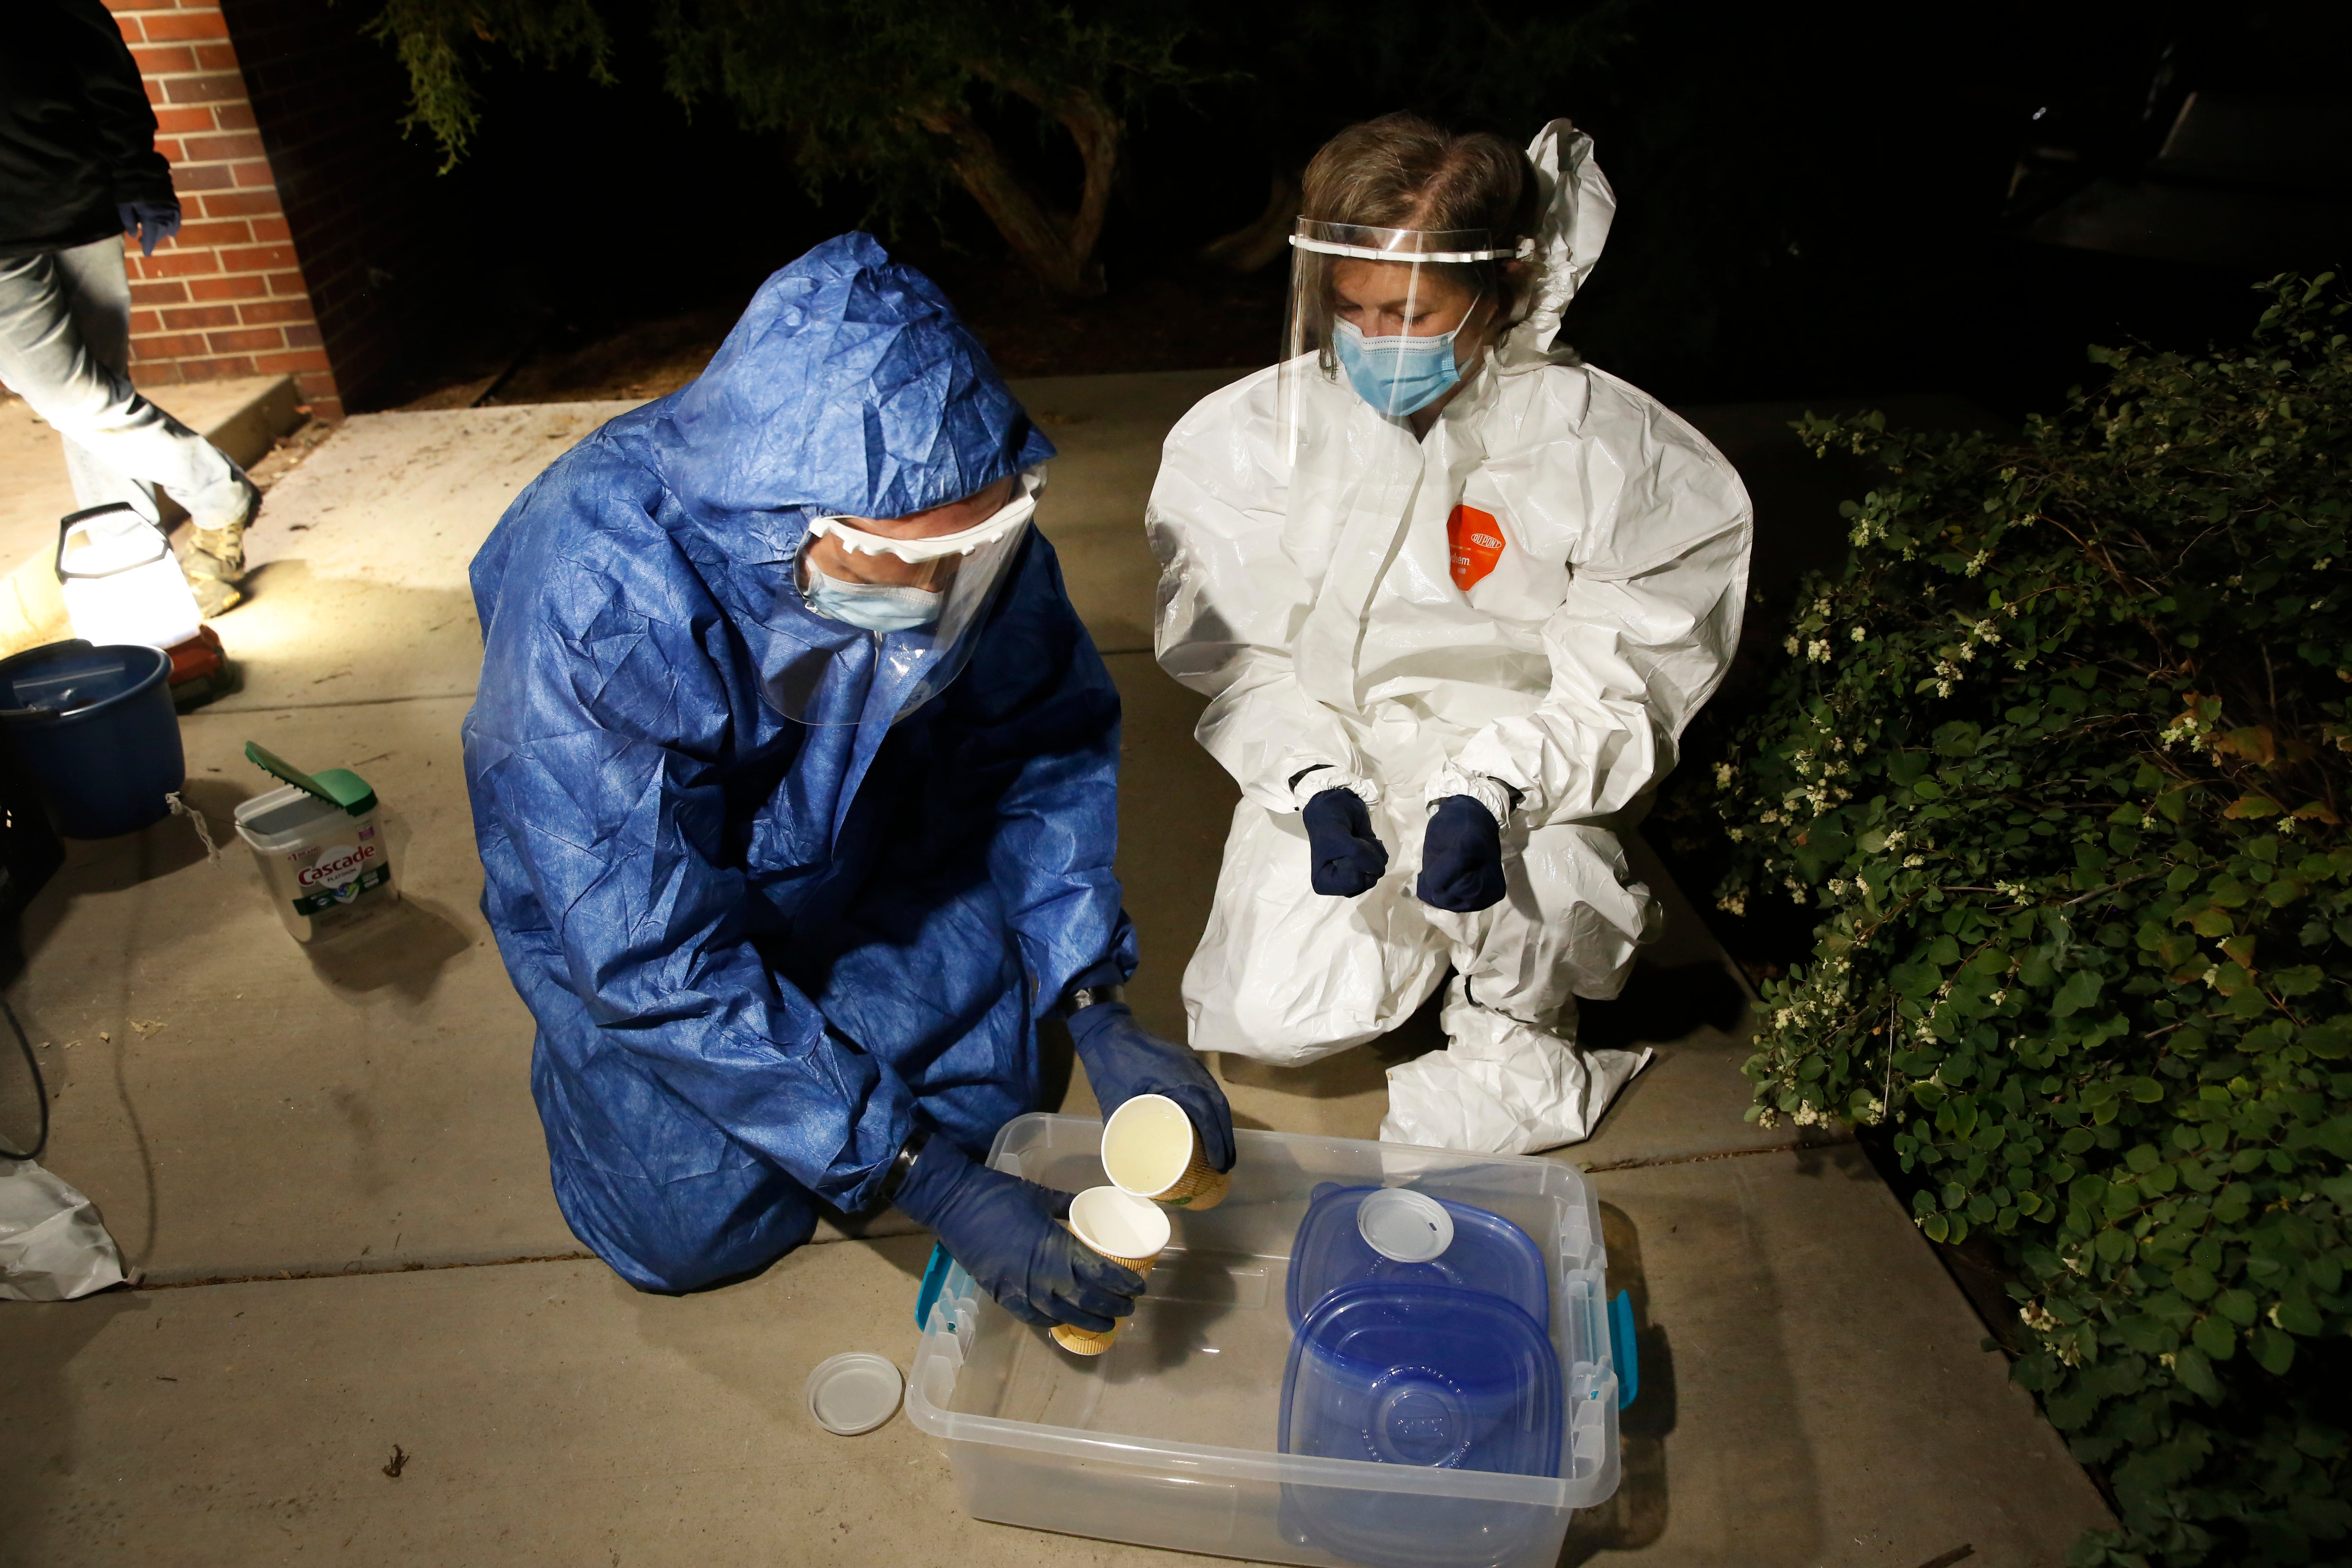 Bruder (right) and her colleague, environmental science professor Miroslav Kummel, pour wastewater samples from to-go coffee cups outside South Hall